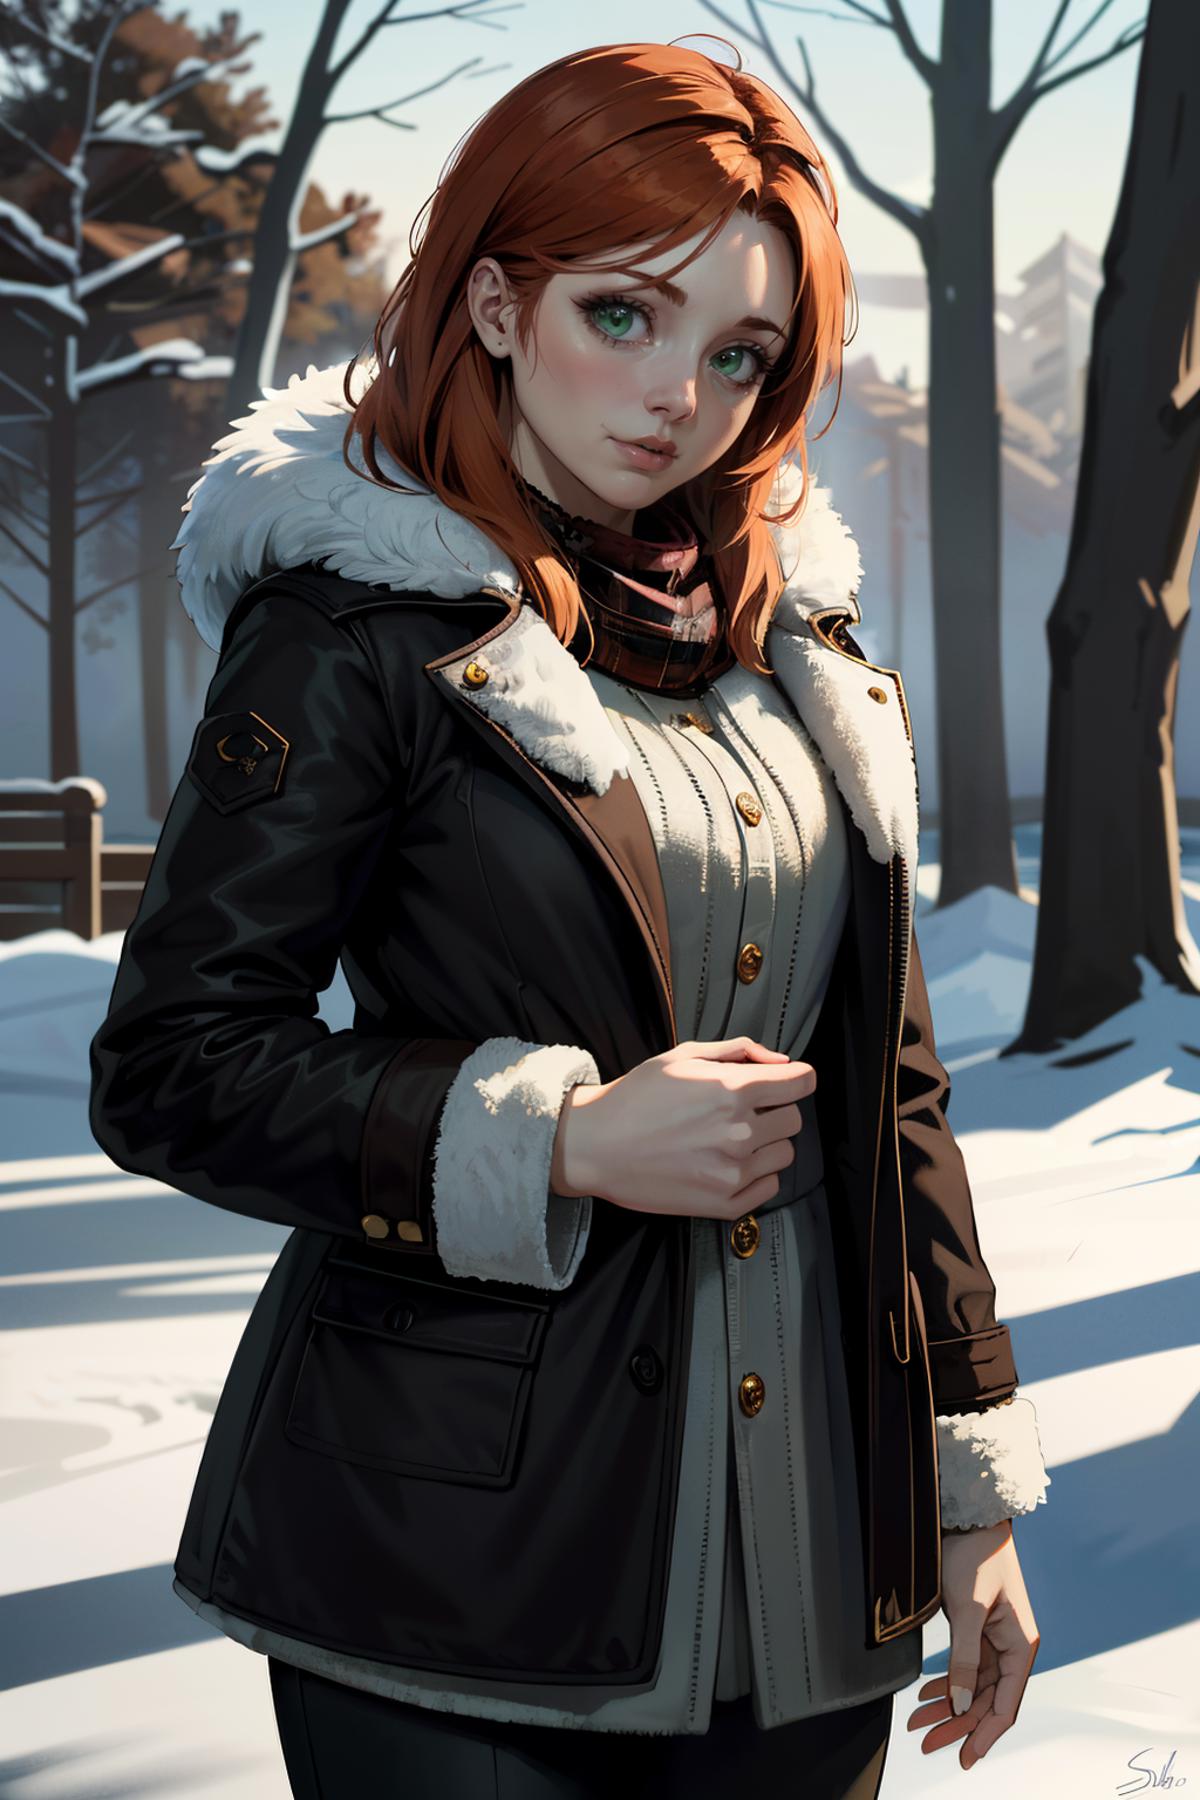 Ashley from Until Dawn image by BloodRedKittie